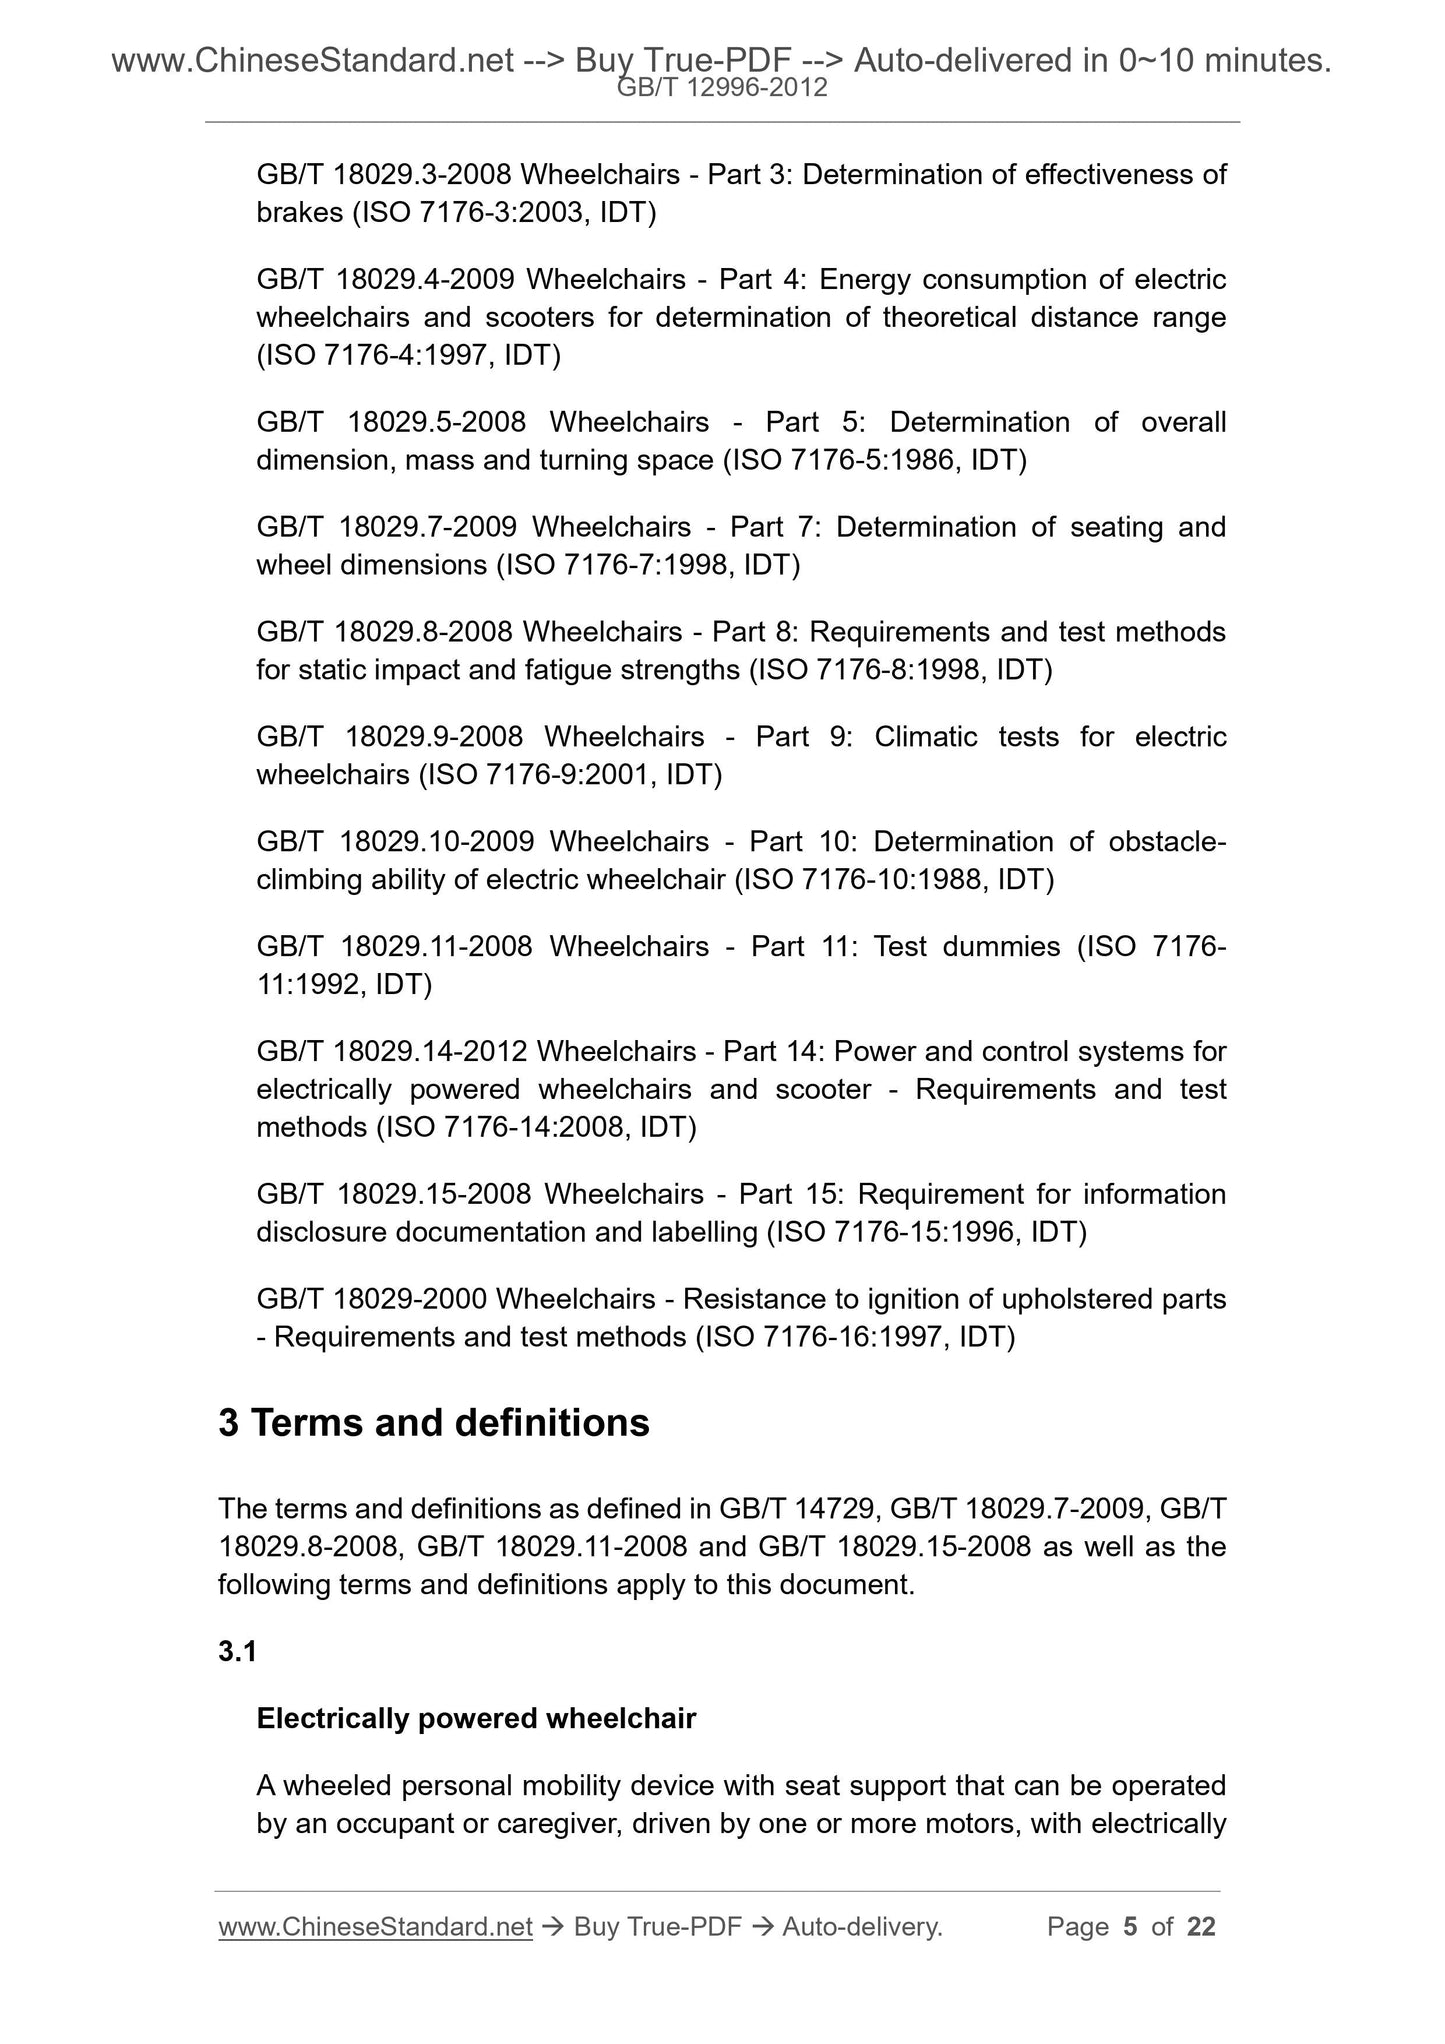 GB/T 12996-2012 Page 4